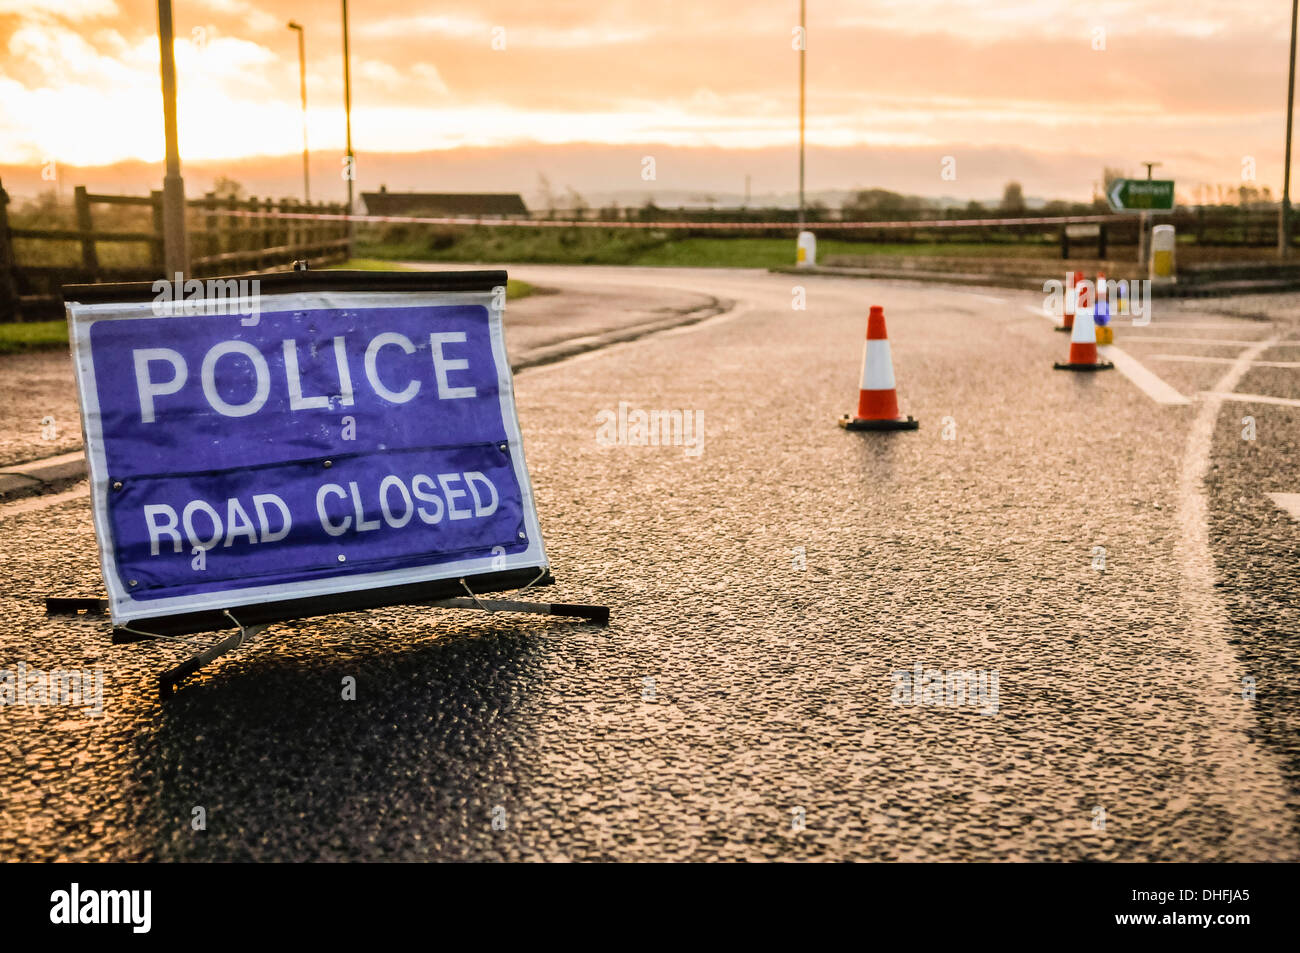 Police road closed sign and traffic cones seal off a road following an incident Stock Photo